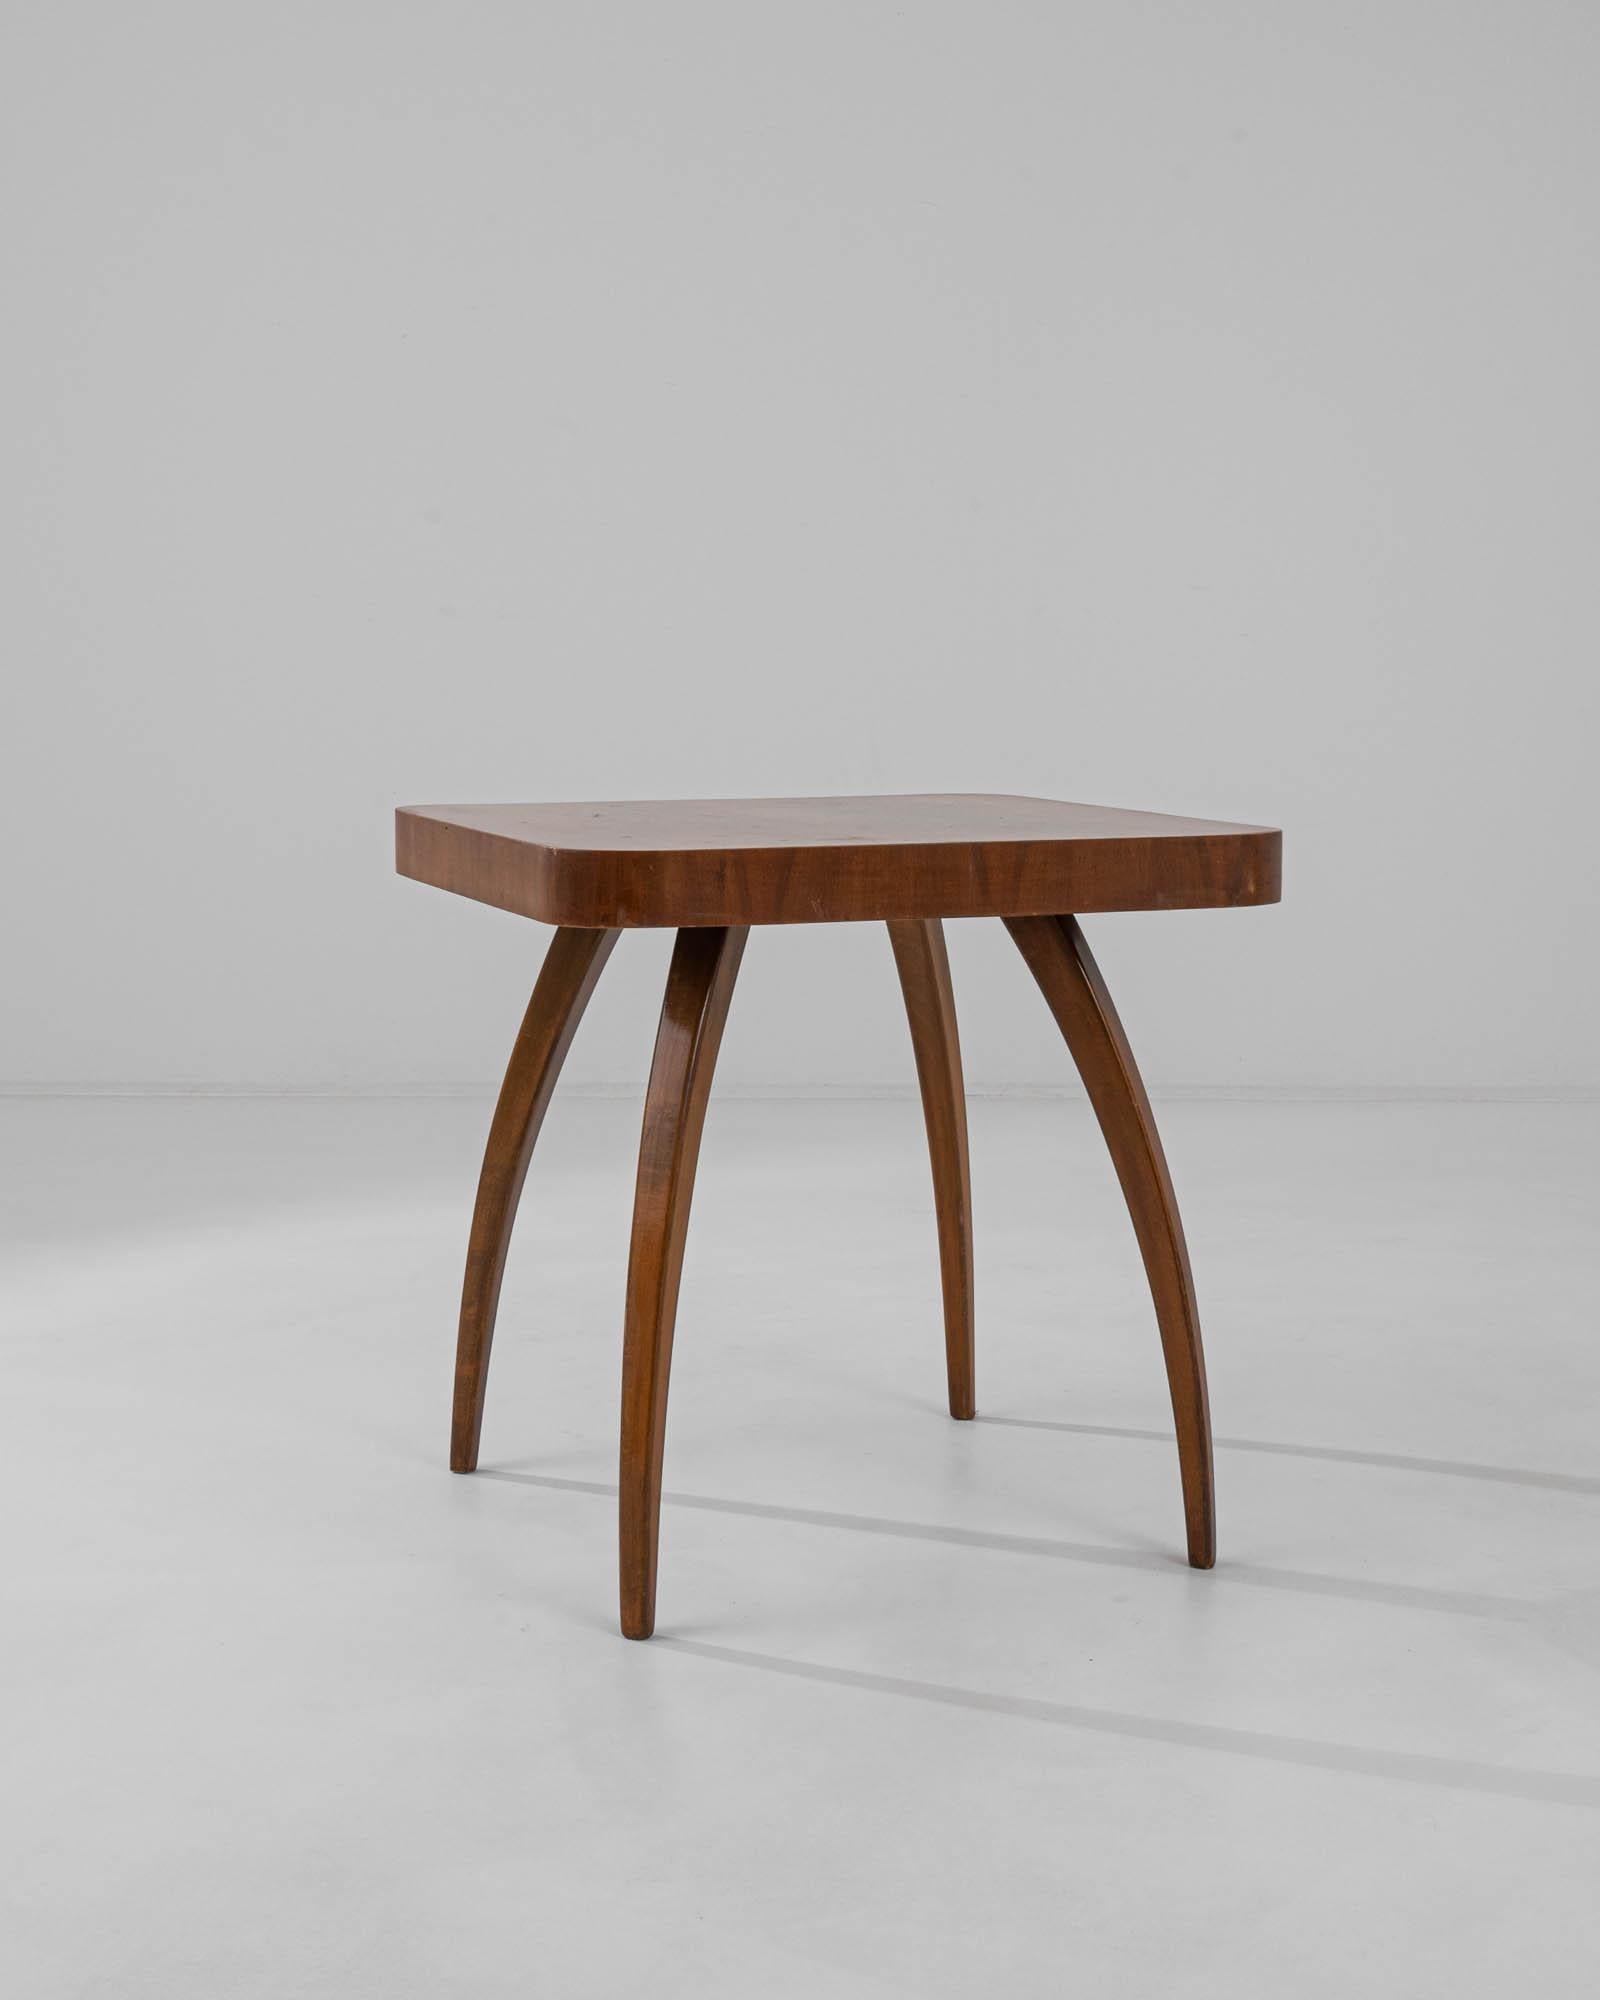 Designed by Jindrich Halabala, this iconic side table was produced in the former Czechoslovakia, circa 1930-50. Known as the ‘spider table,’ the H259 owes its name to the playful curve of bentwood beech legs. A decorative wood veneer is composed